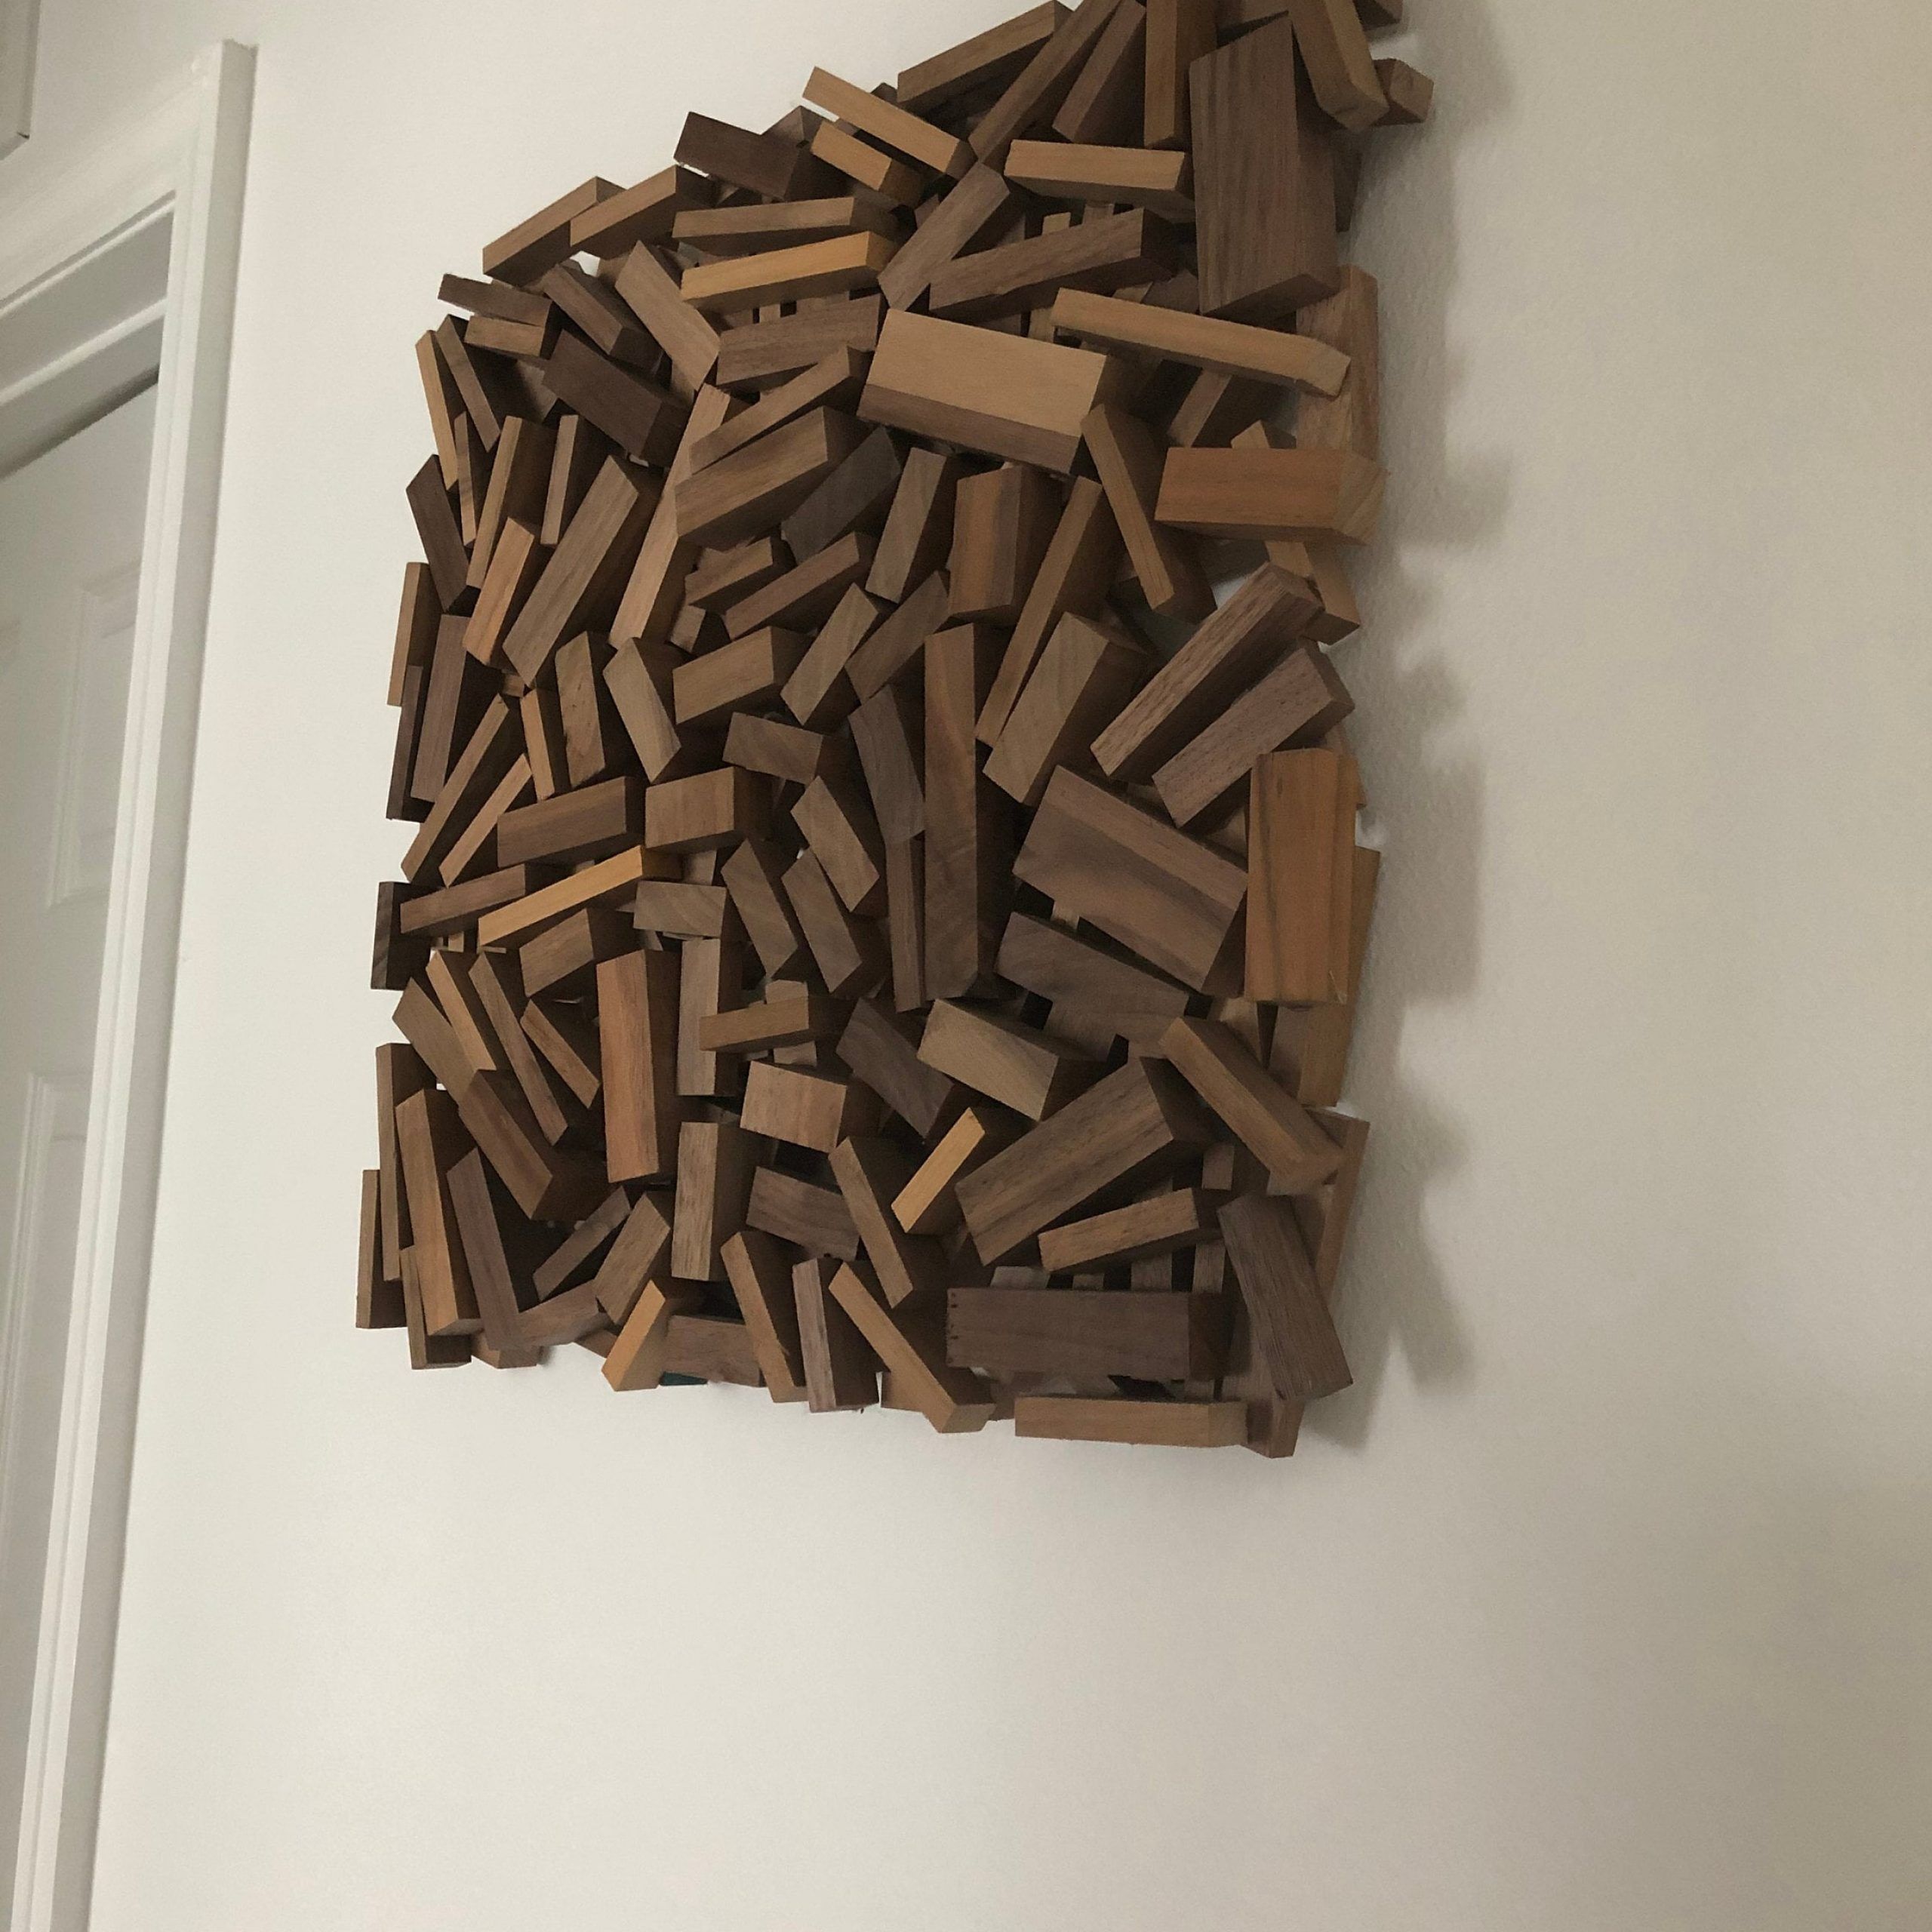 Abstract Wood Sculpture Walnut Wall Hanging Wood Wall Art – Etsy Throughout Abstract Wood Wall Art (View 8 of 15)